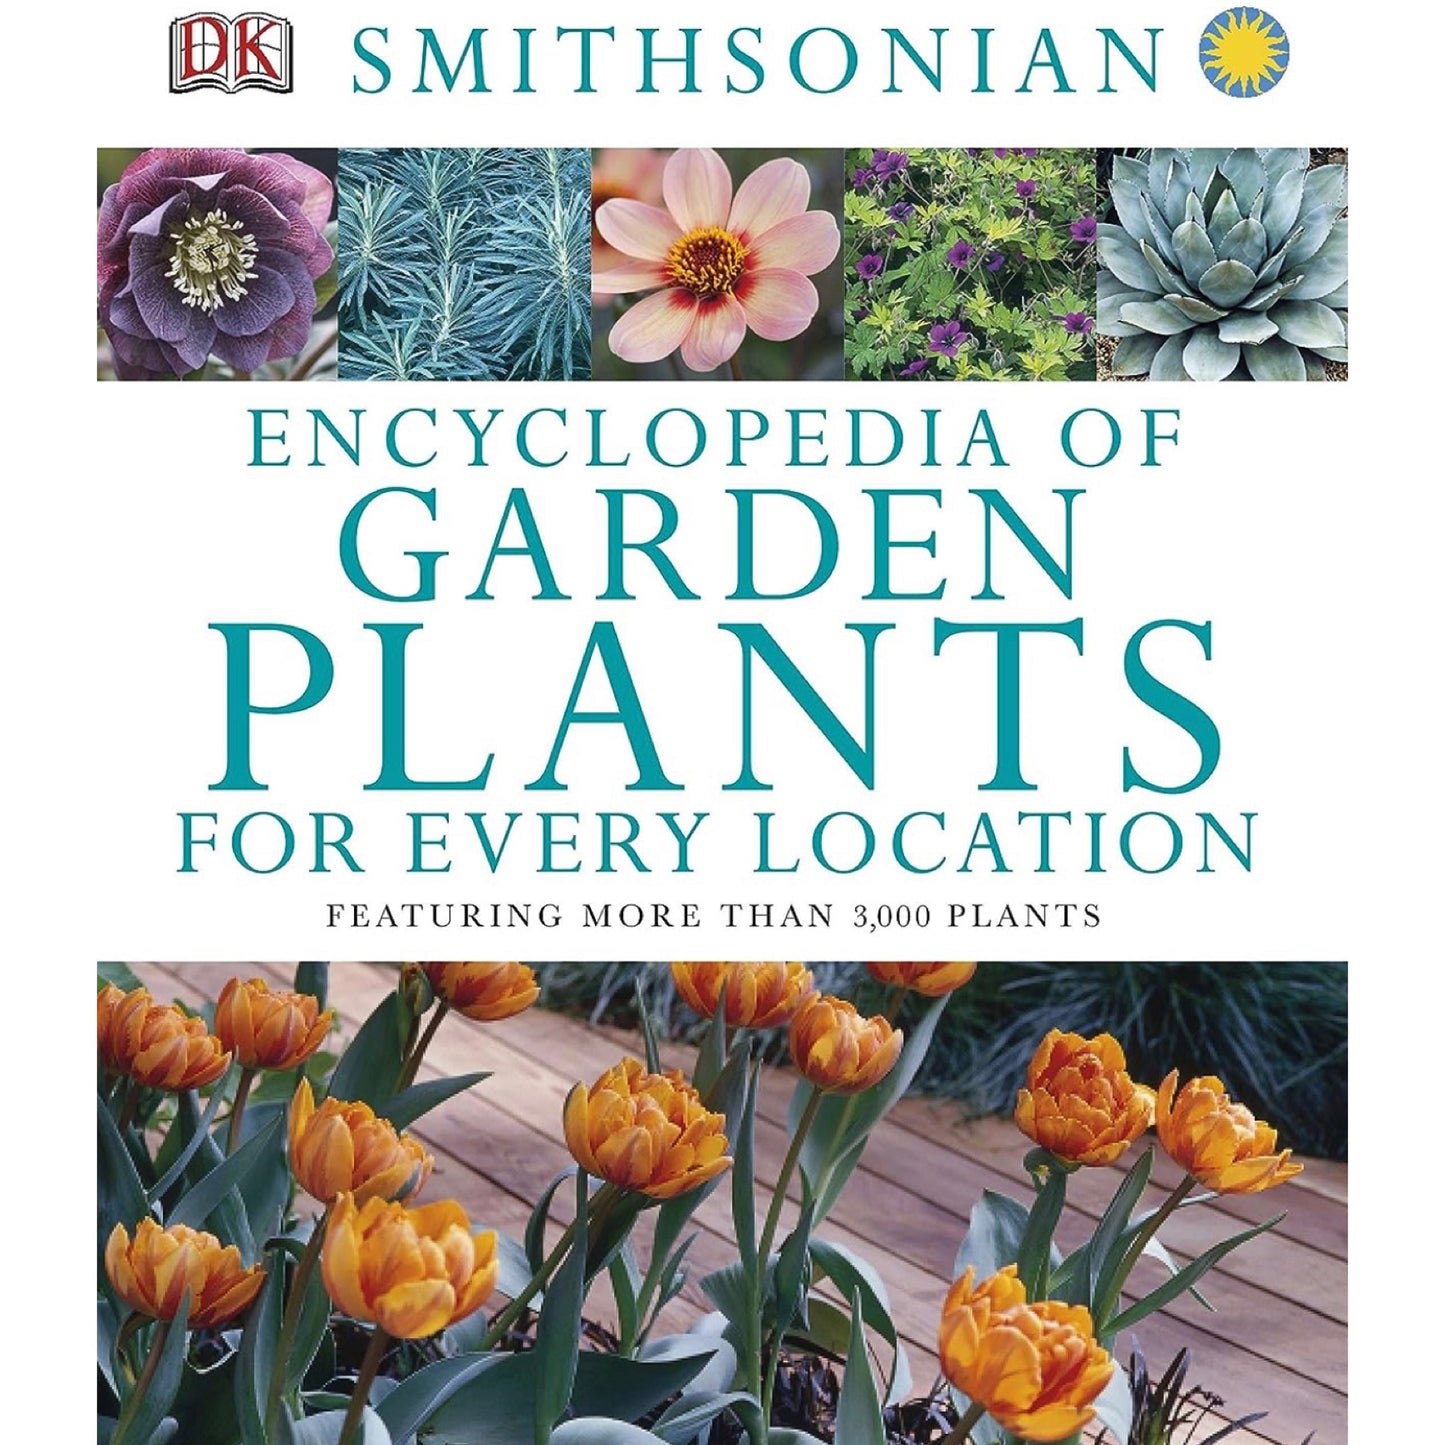 Smithsonian Encyclopedia of Garden Plants for Every Location